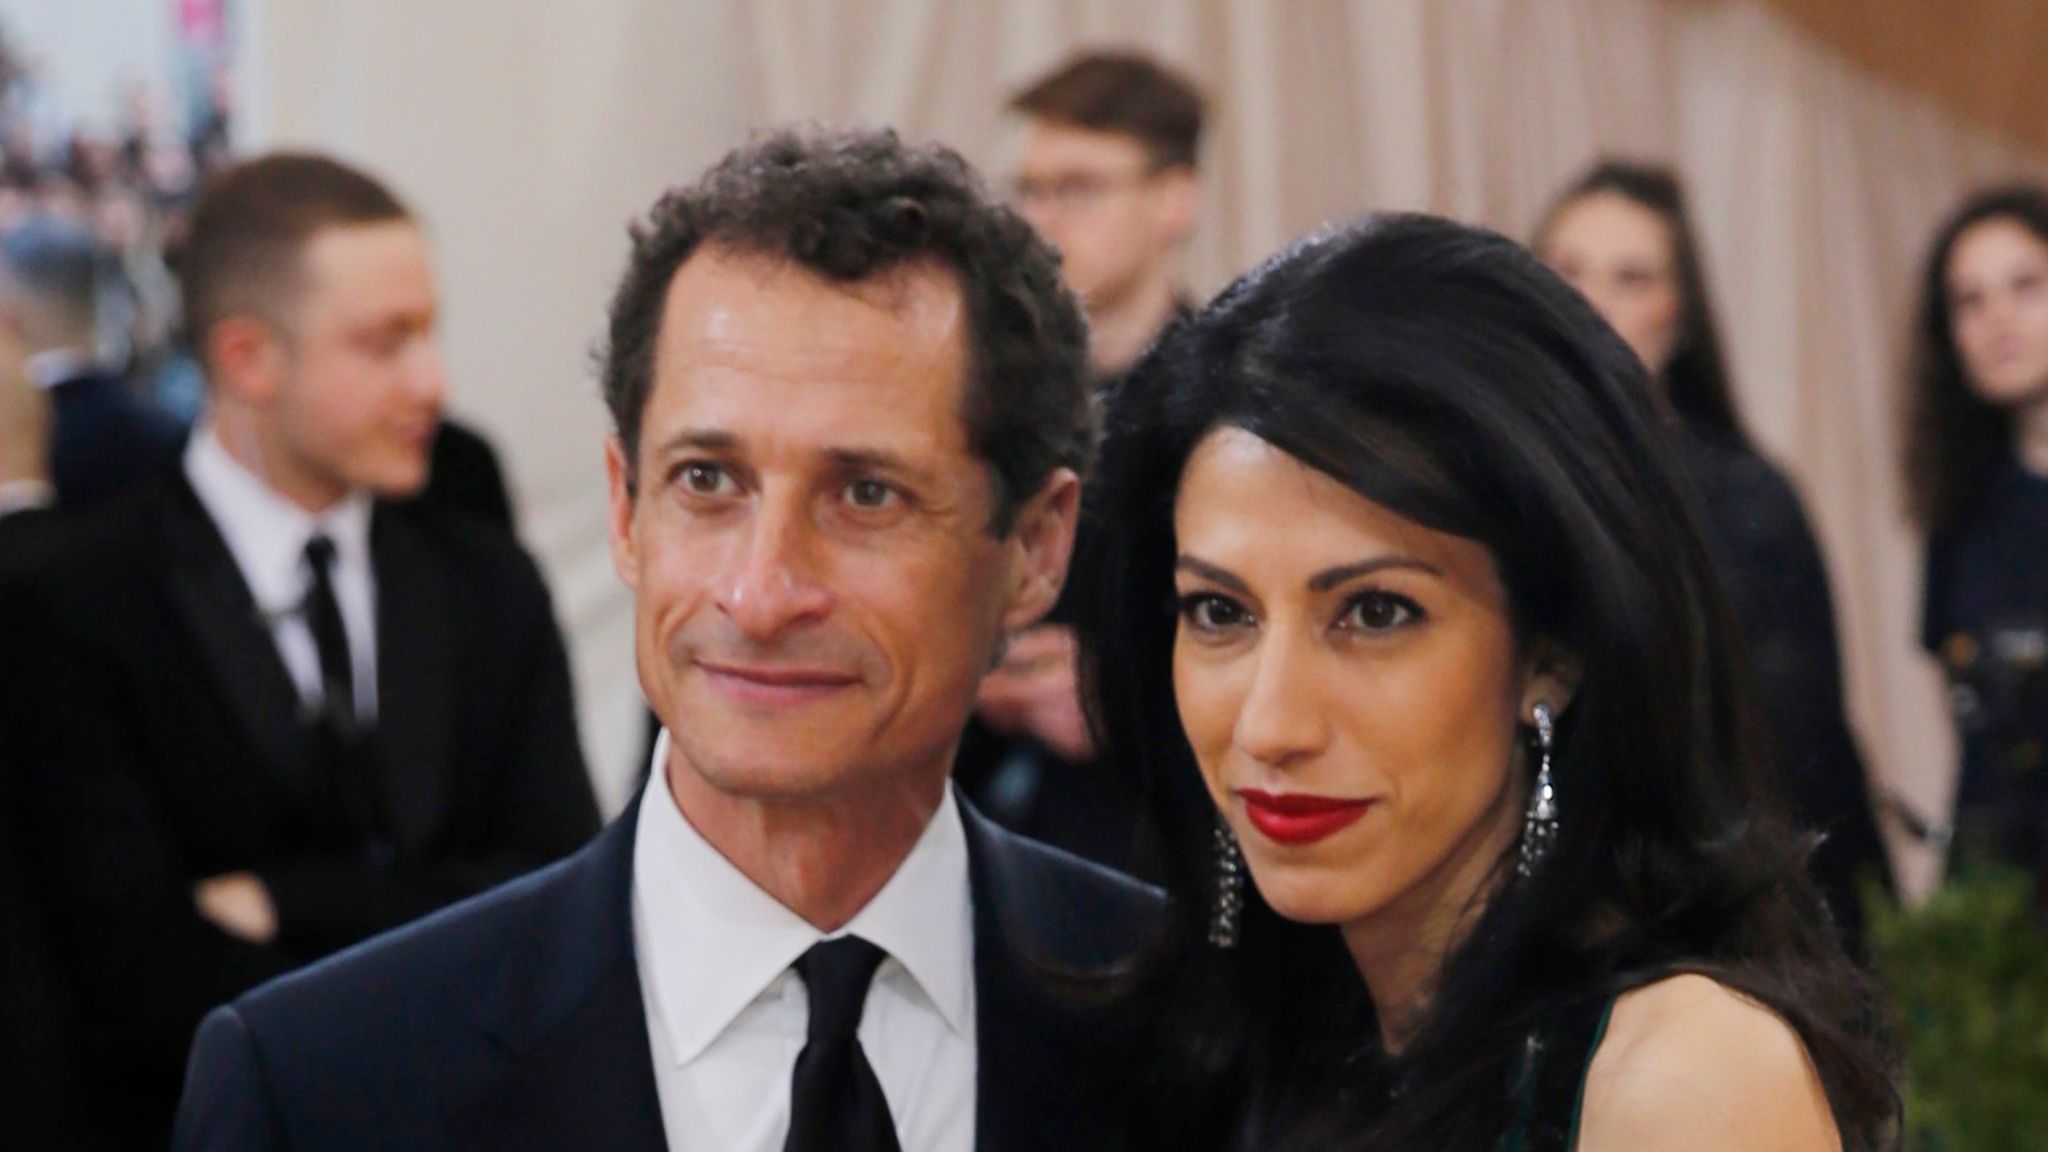 Former US Representative Anthony Weiner and wife Huma Abedin arrive at a Ne...